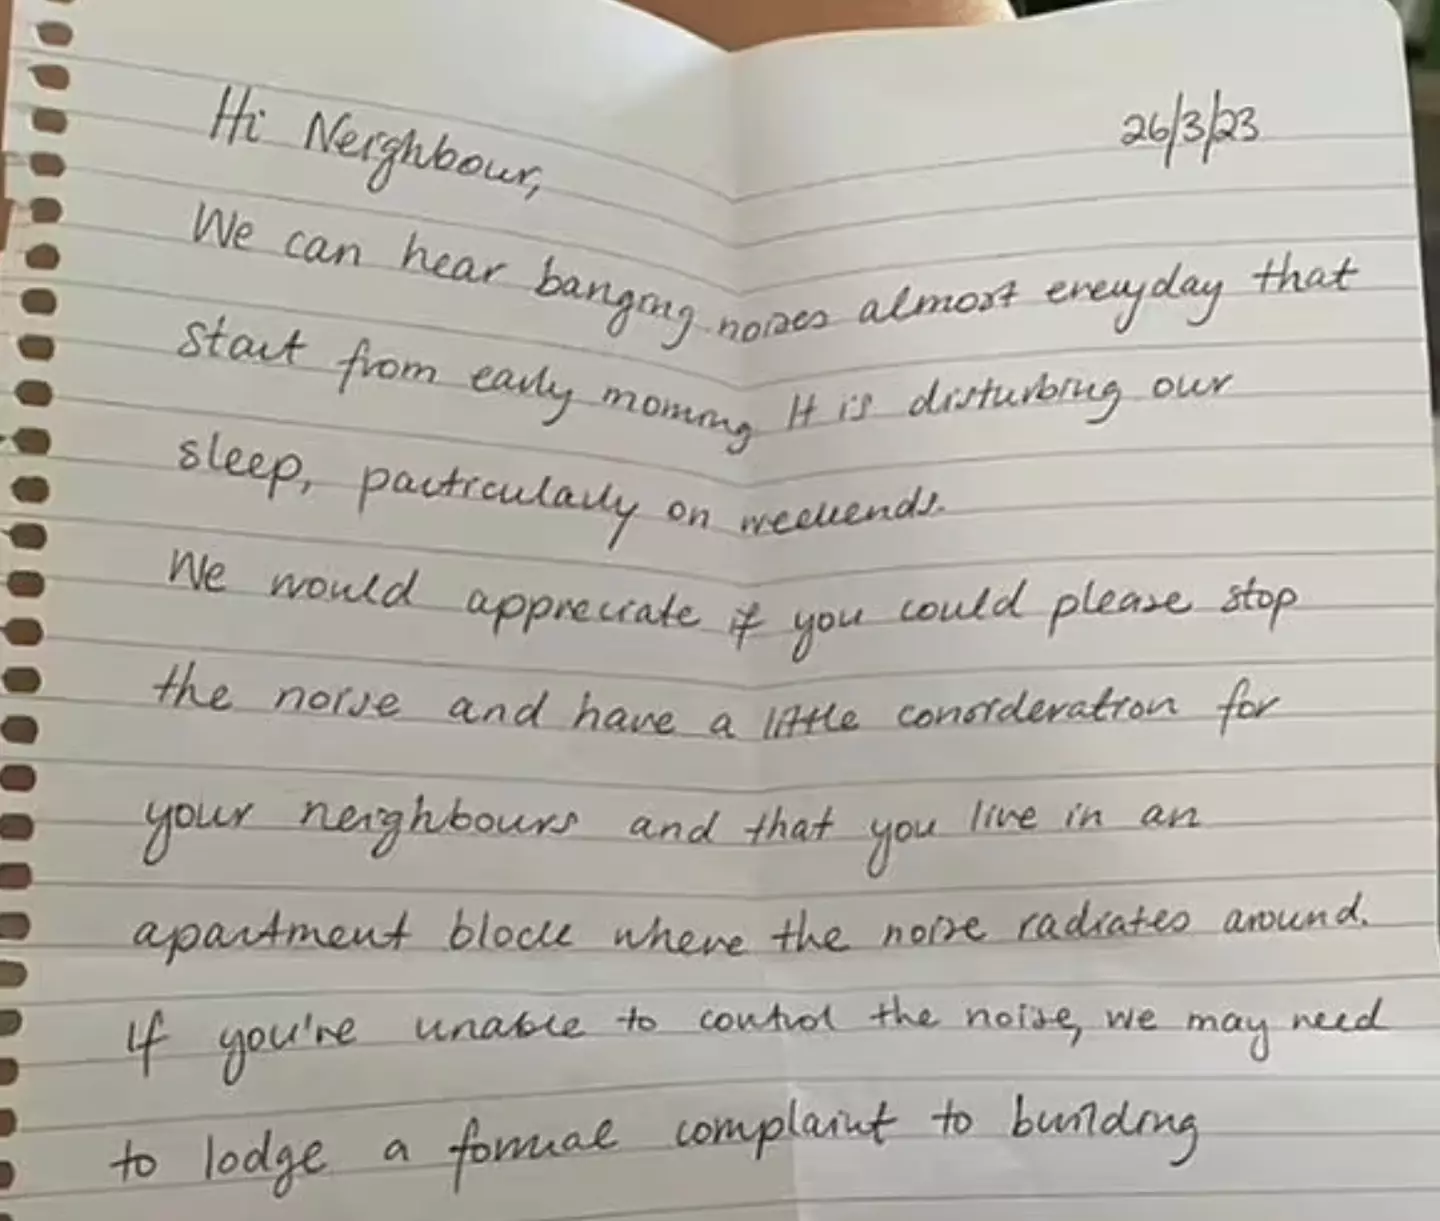 A neighbour was not happy with the level of noise the kids were making.